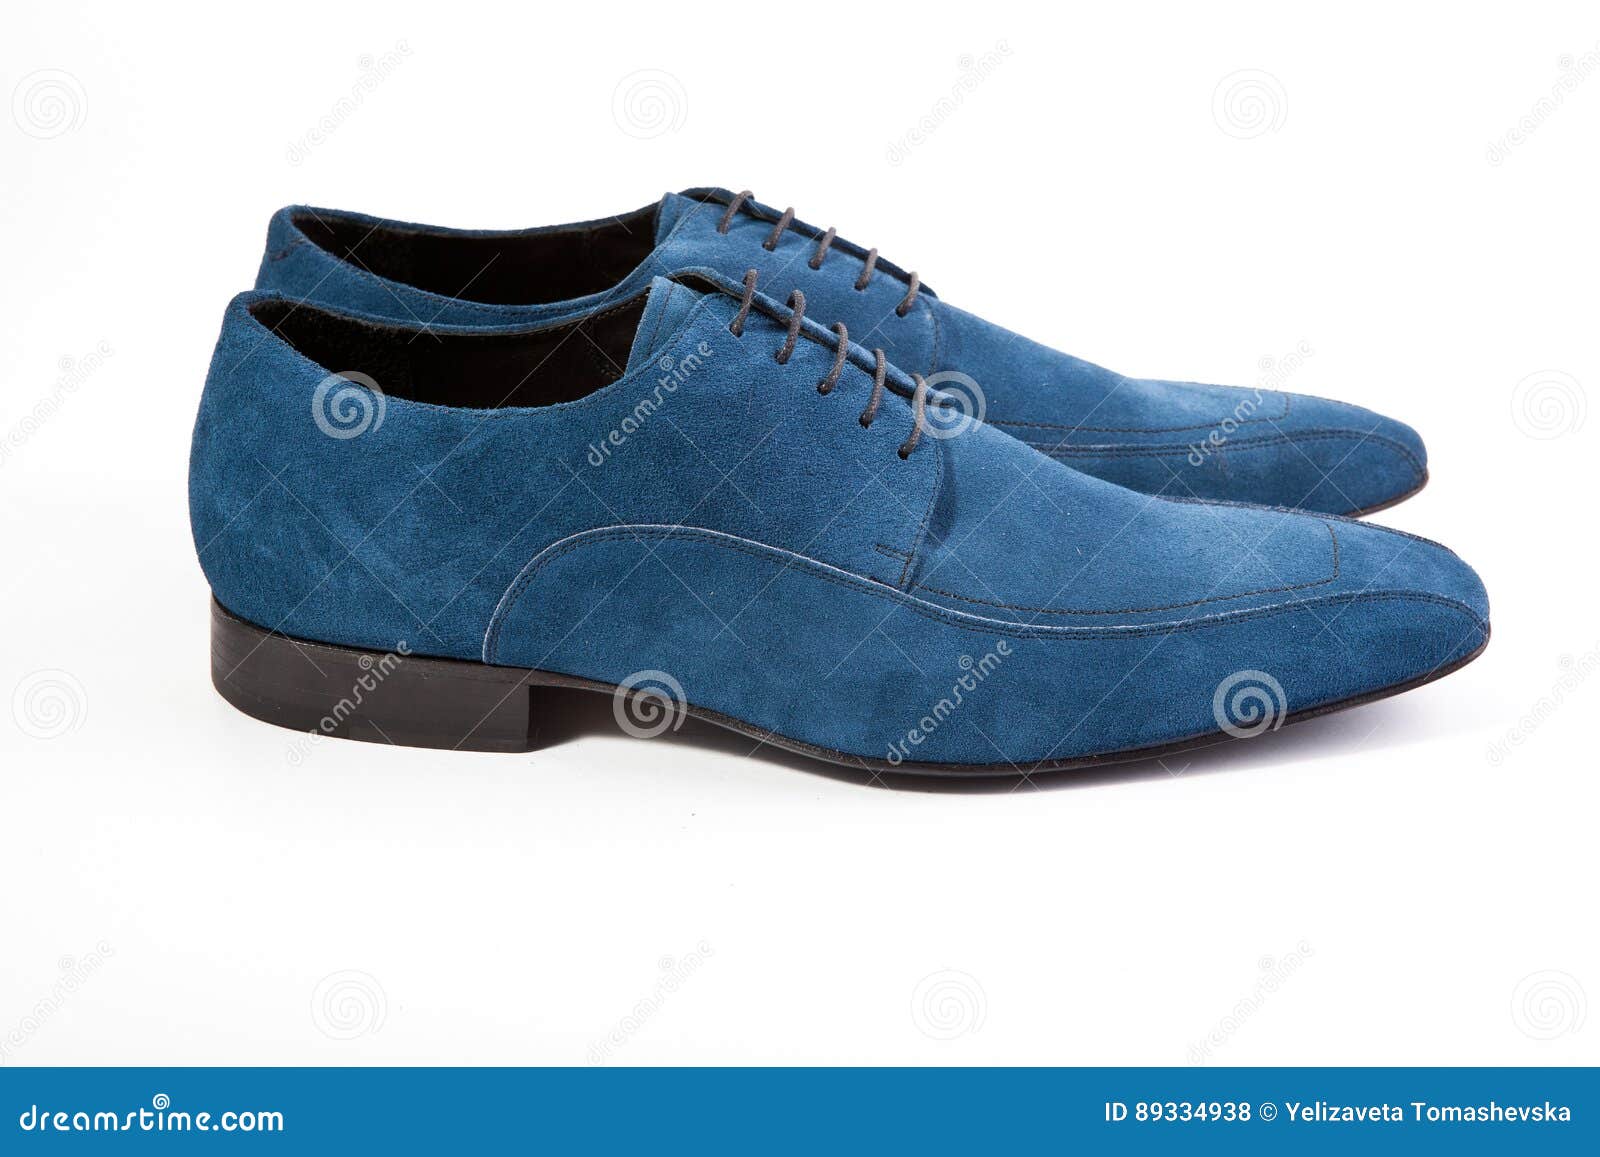 Men`s Shoes on a White Background Stock Photo - Image of beautiful ...